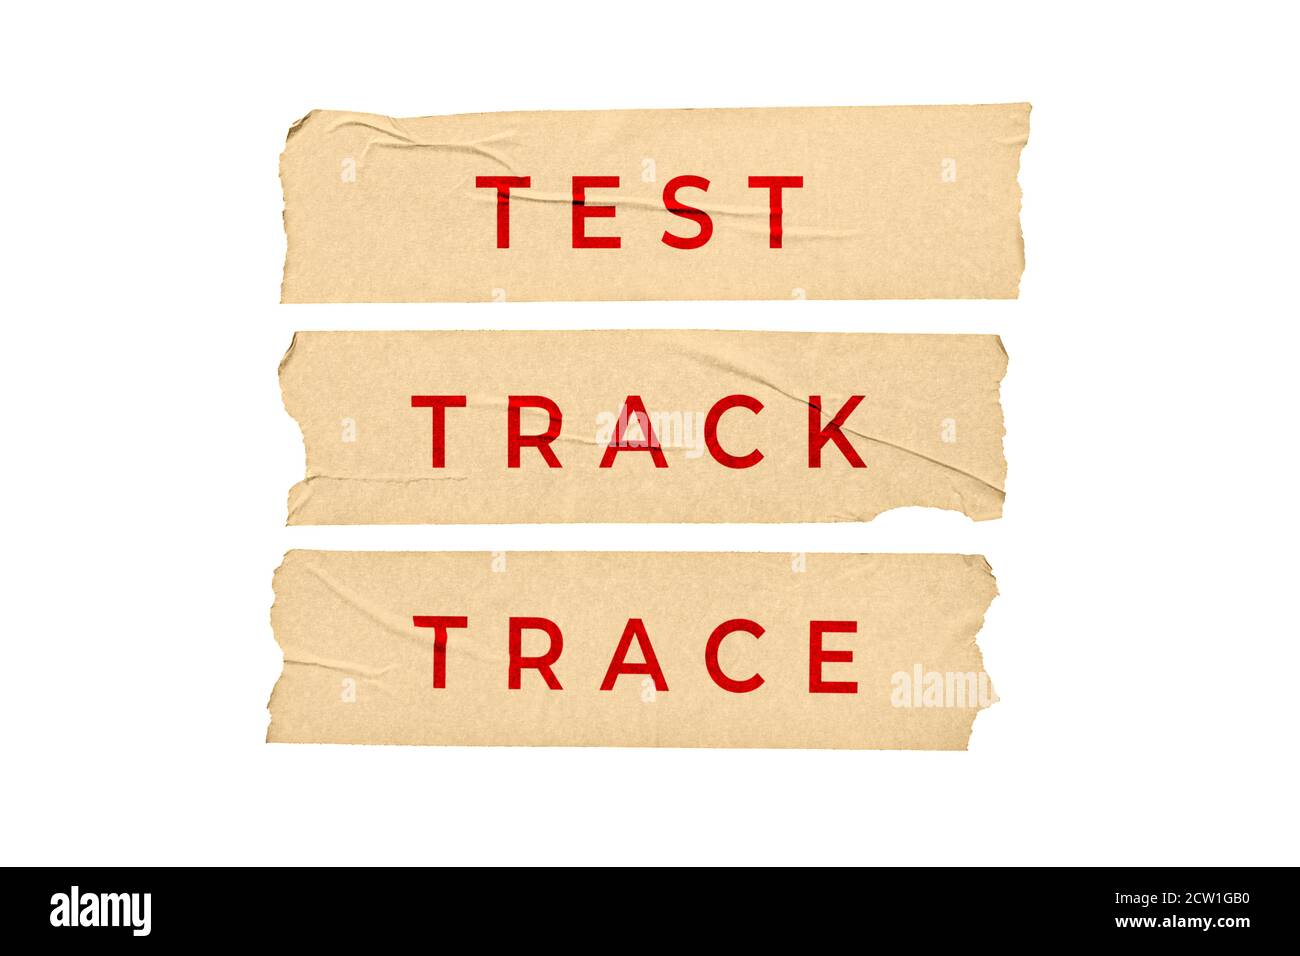 Test Trace Track concept. Tape stickers with text isolated on white background Stock Photo